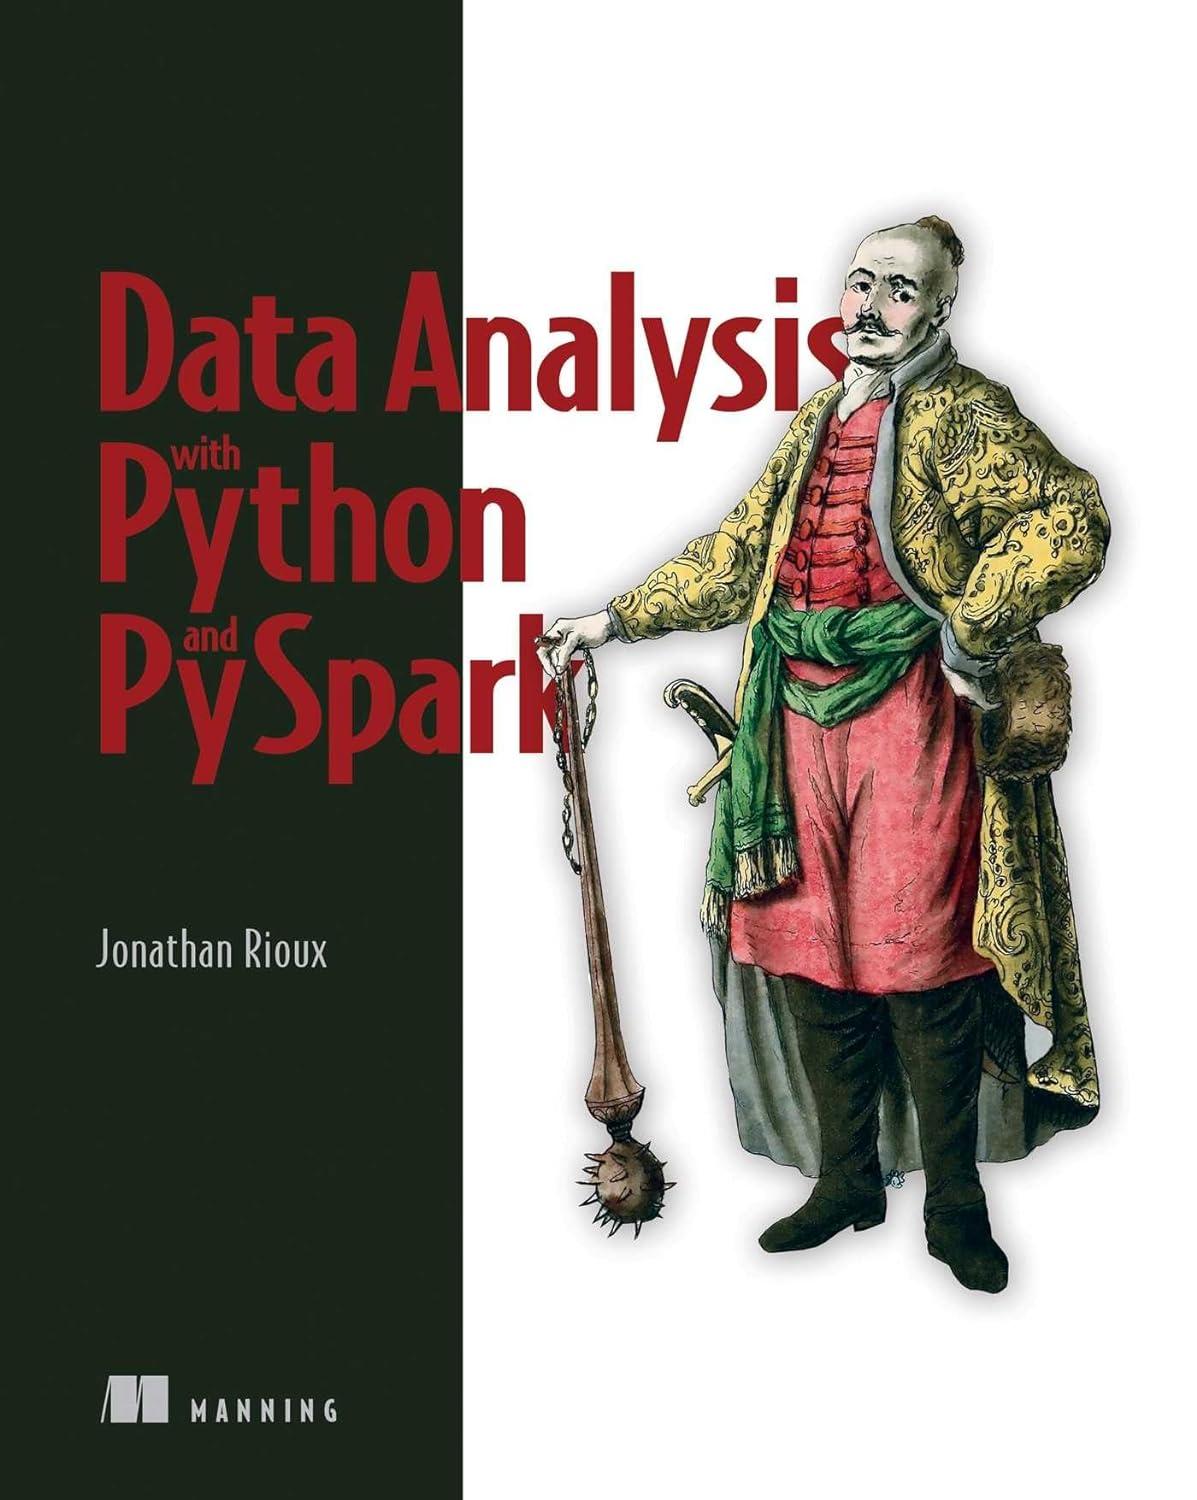 The Best Python Books for Data Analysts